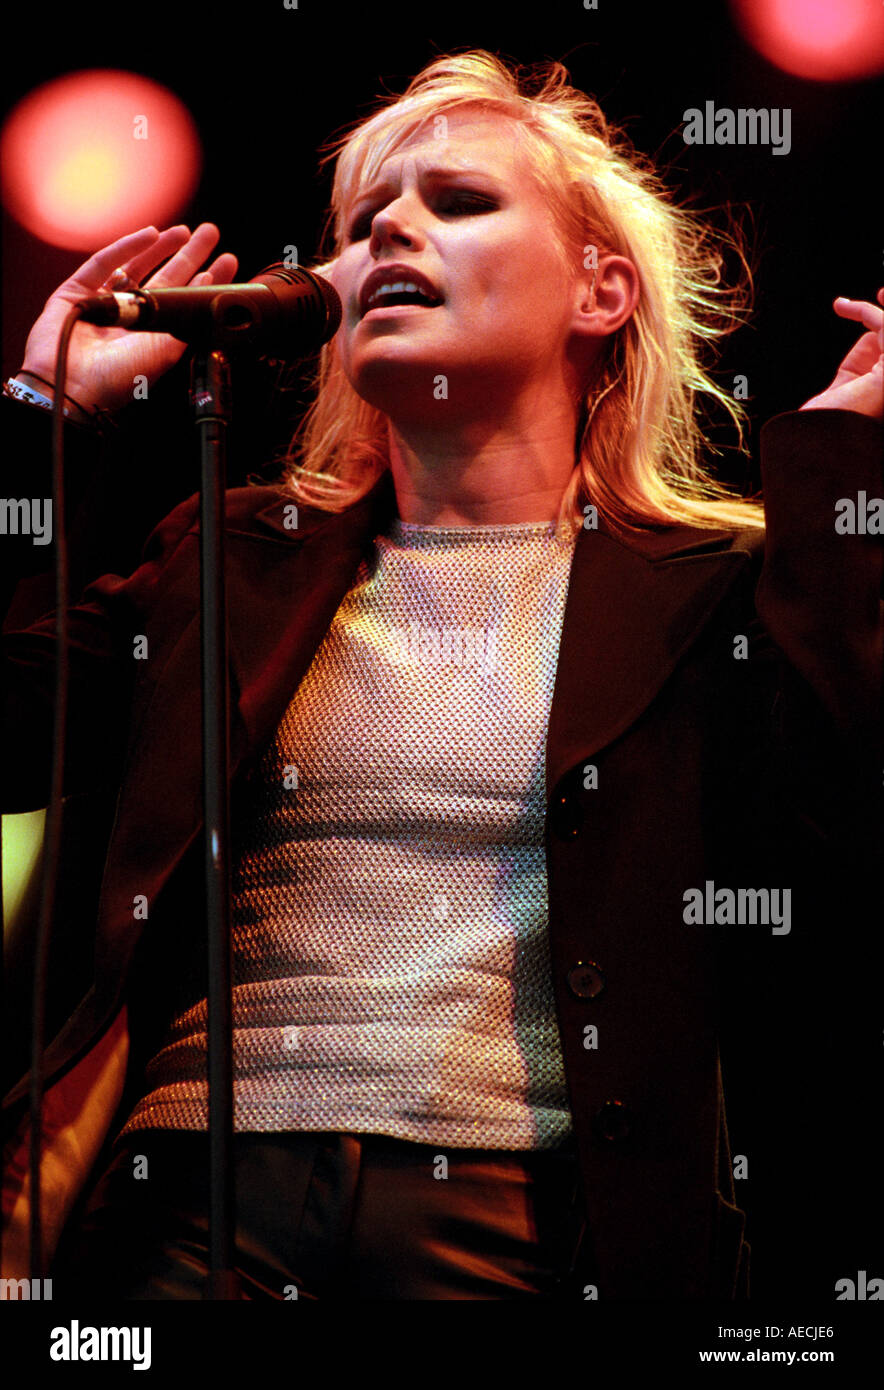 NINA PERSSON OF THE CARDIGANS PLAYING AT THE GLASTONBURY FESTIVAL Stock Photo